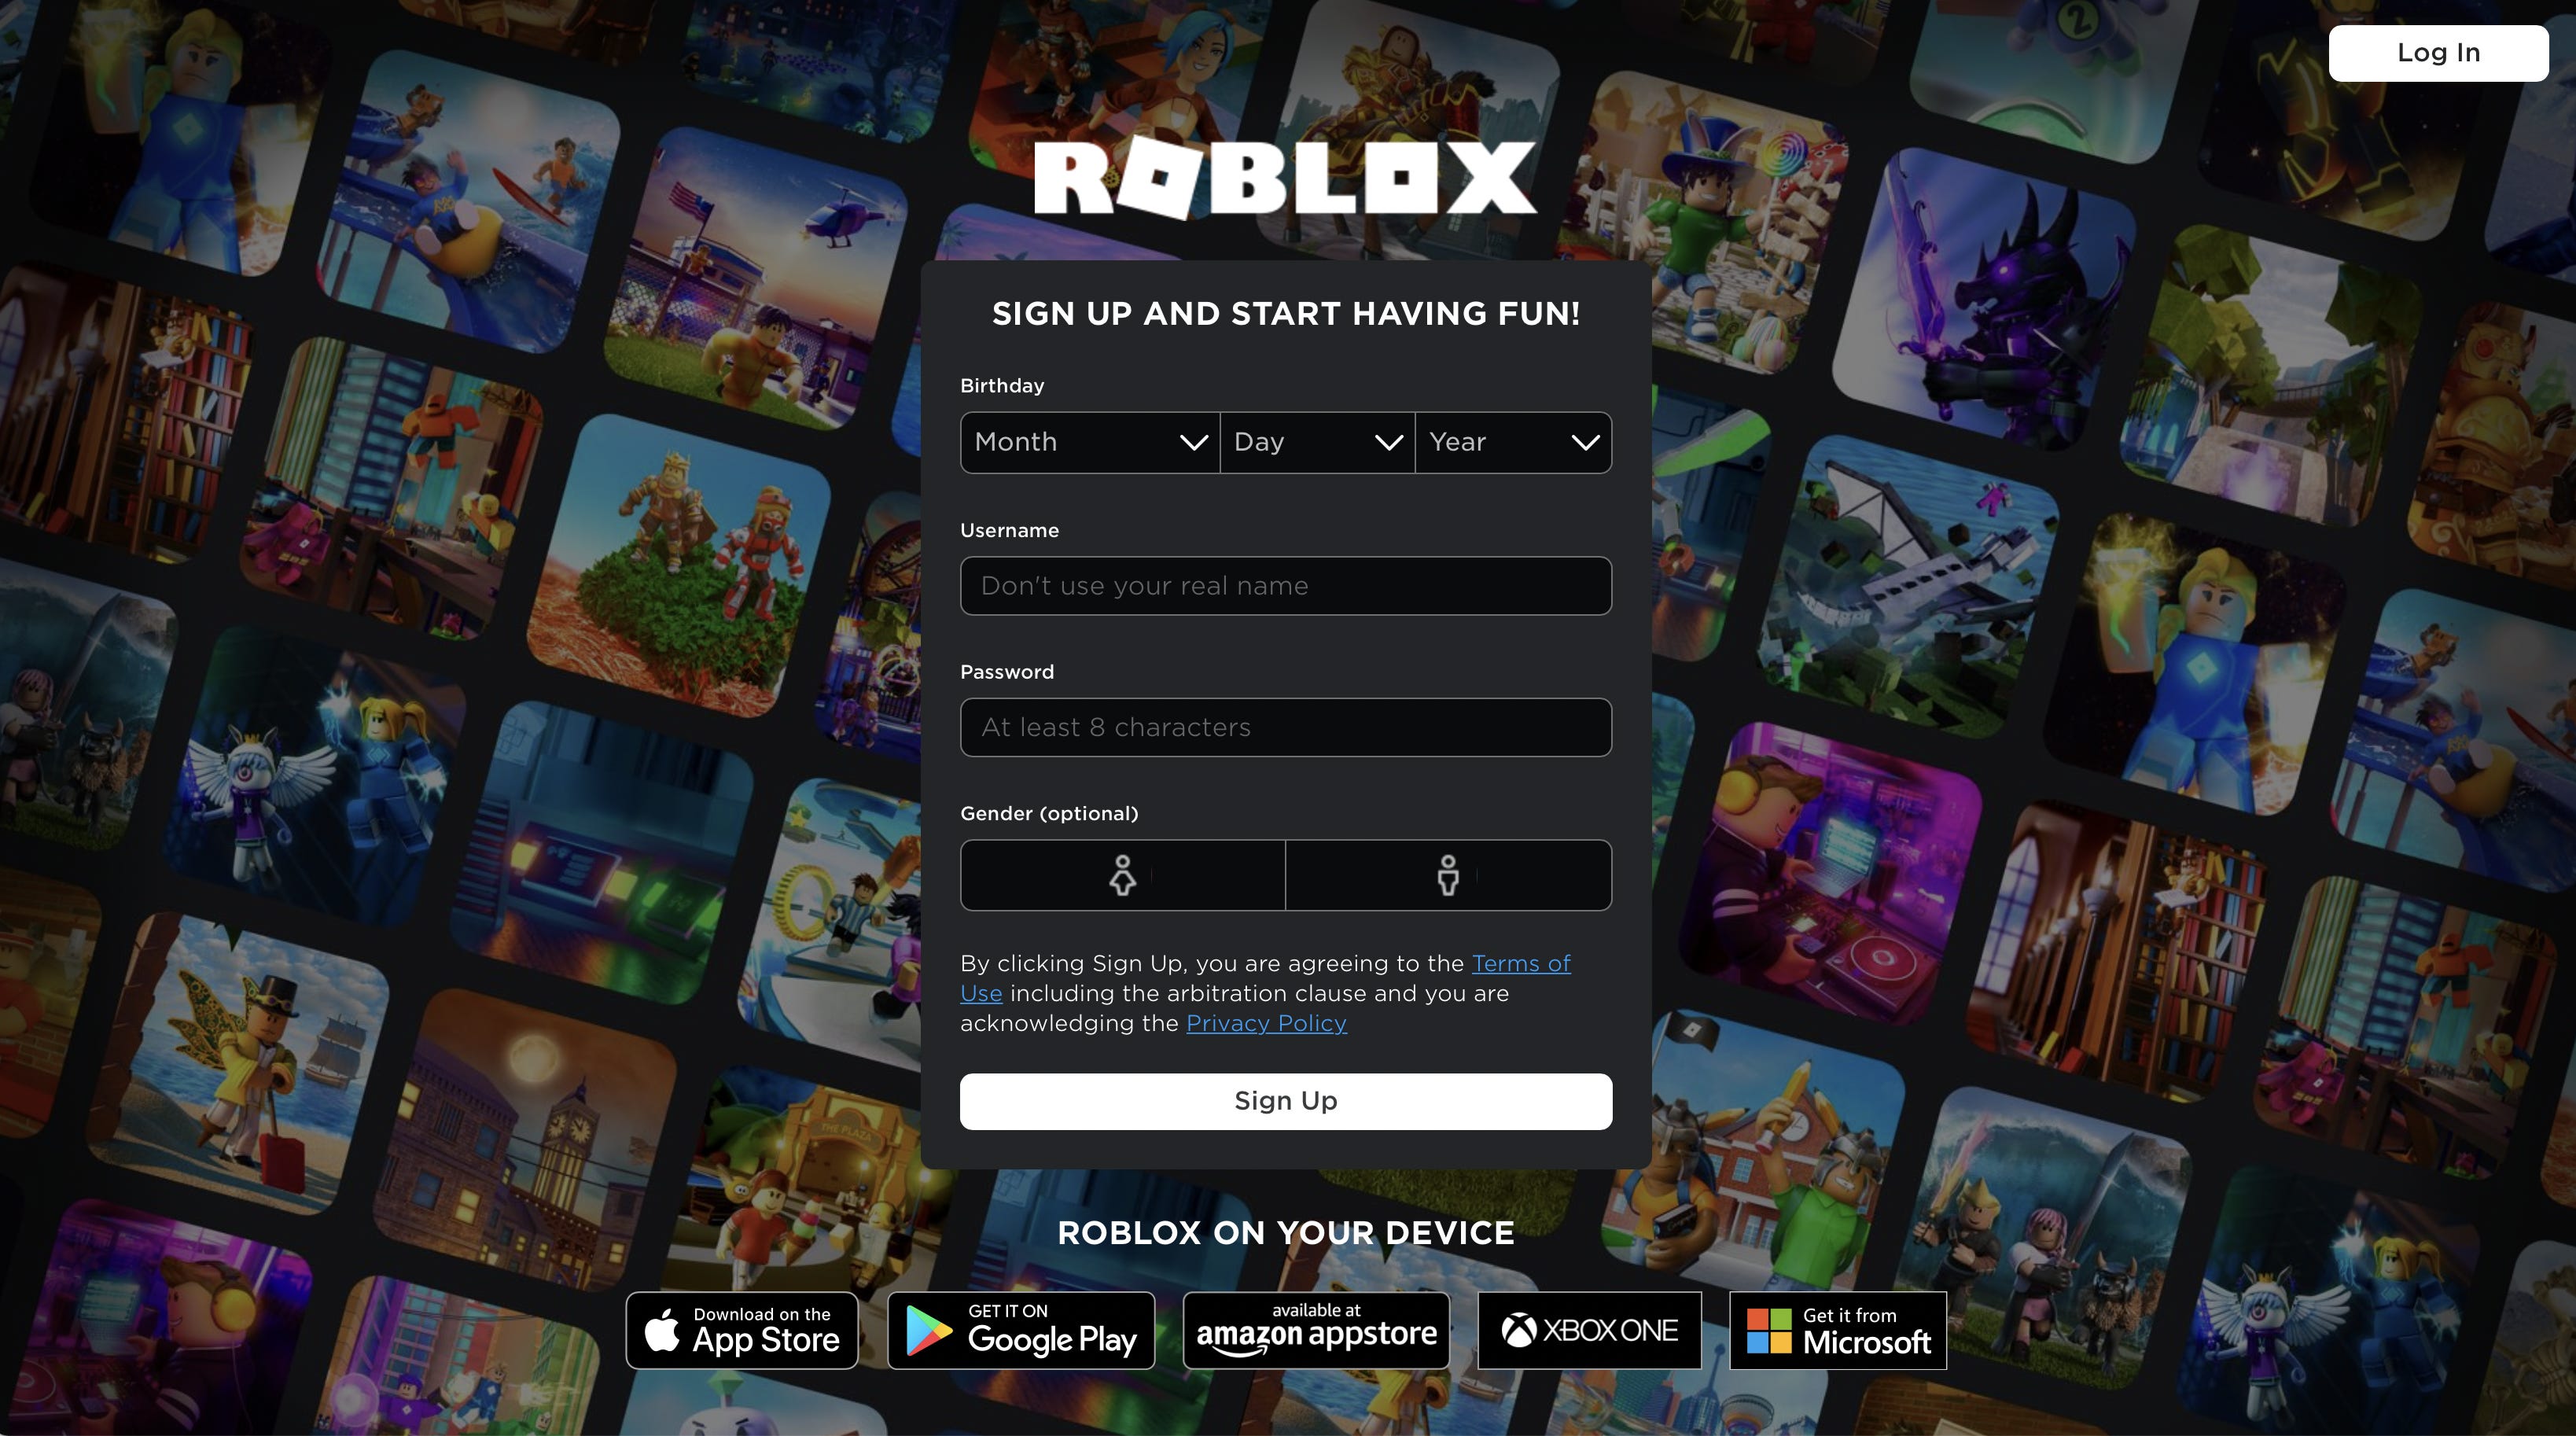 Roblox's strategy to focus on catering to older users